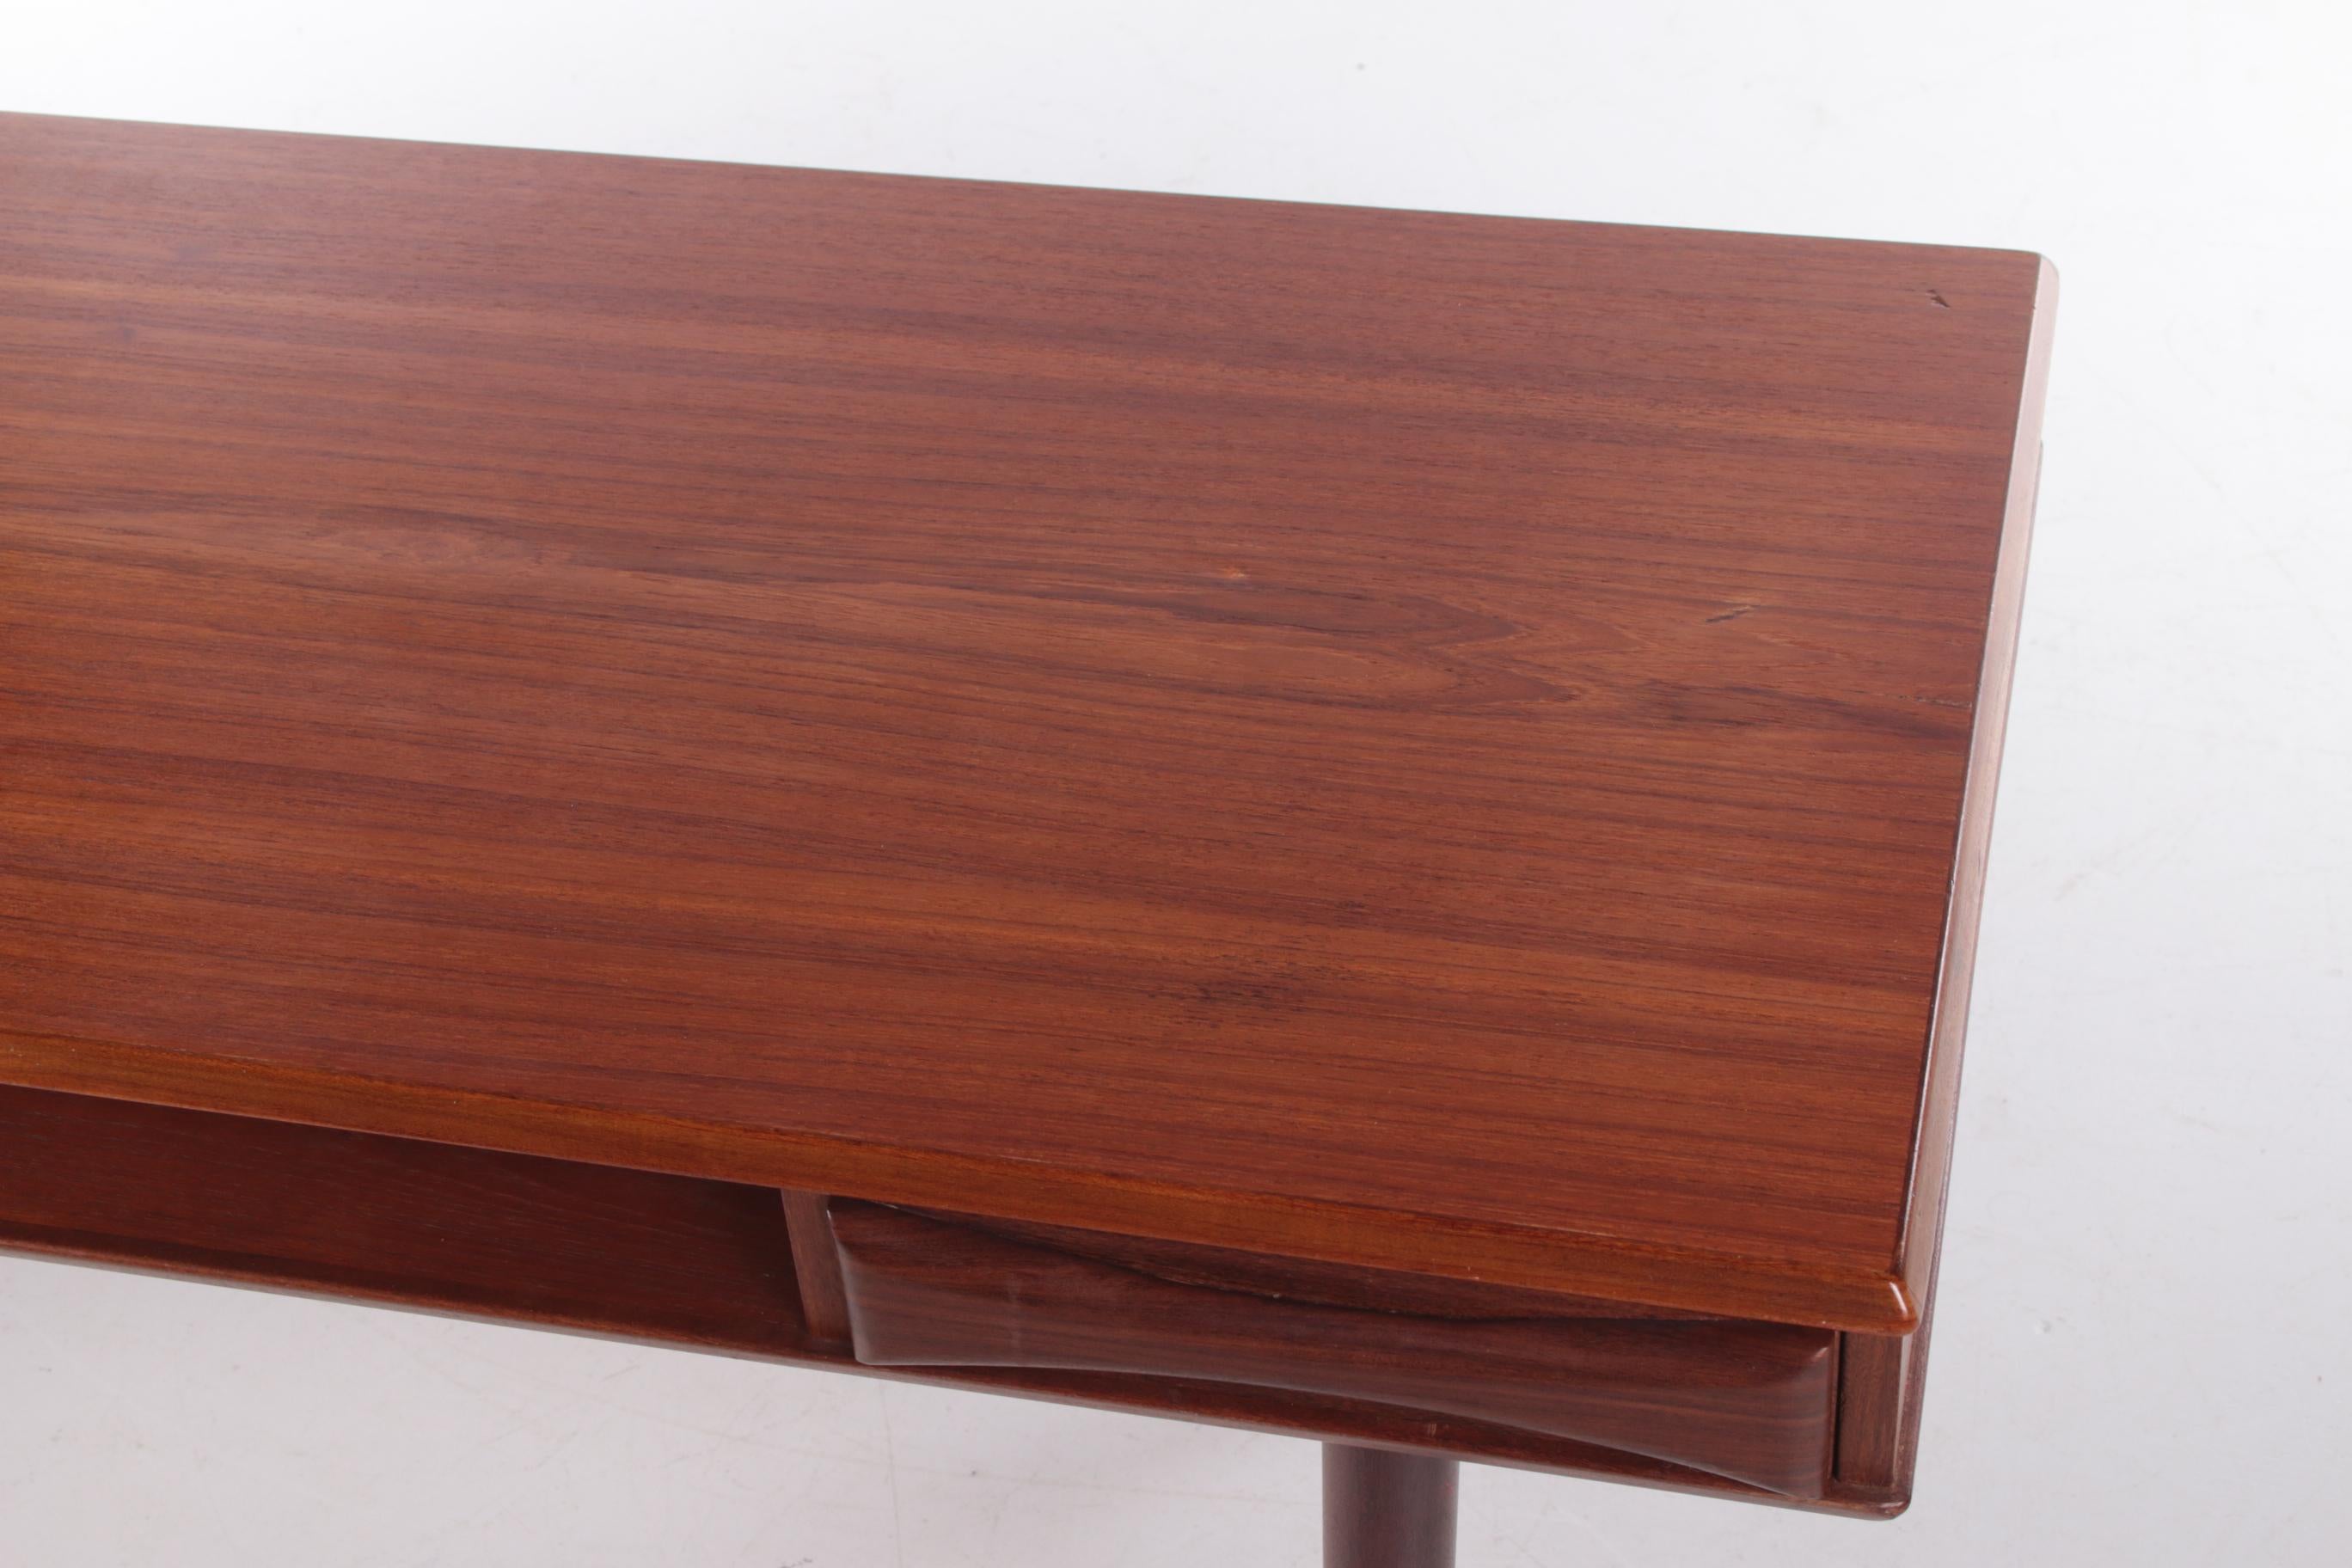 Danish Modernist Teak Coffee Table Made by Dyrlund, 1960s For Sale 1